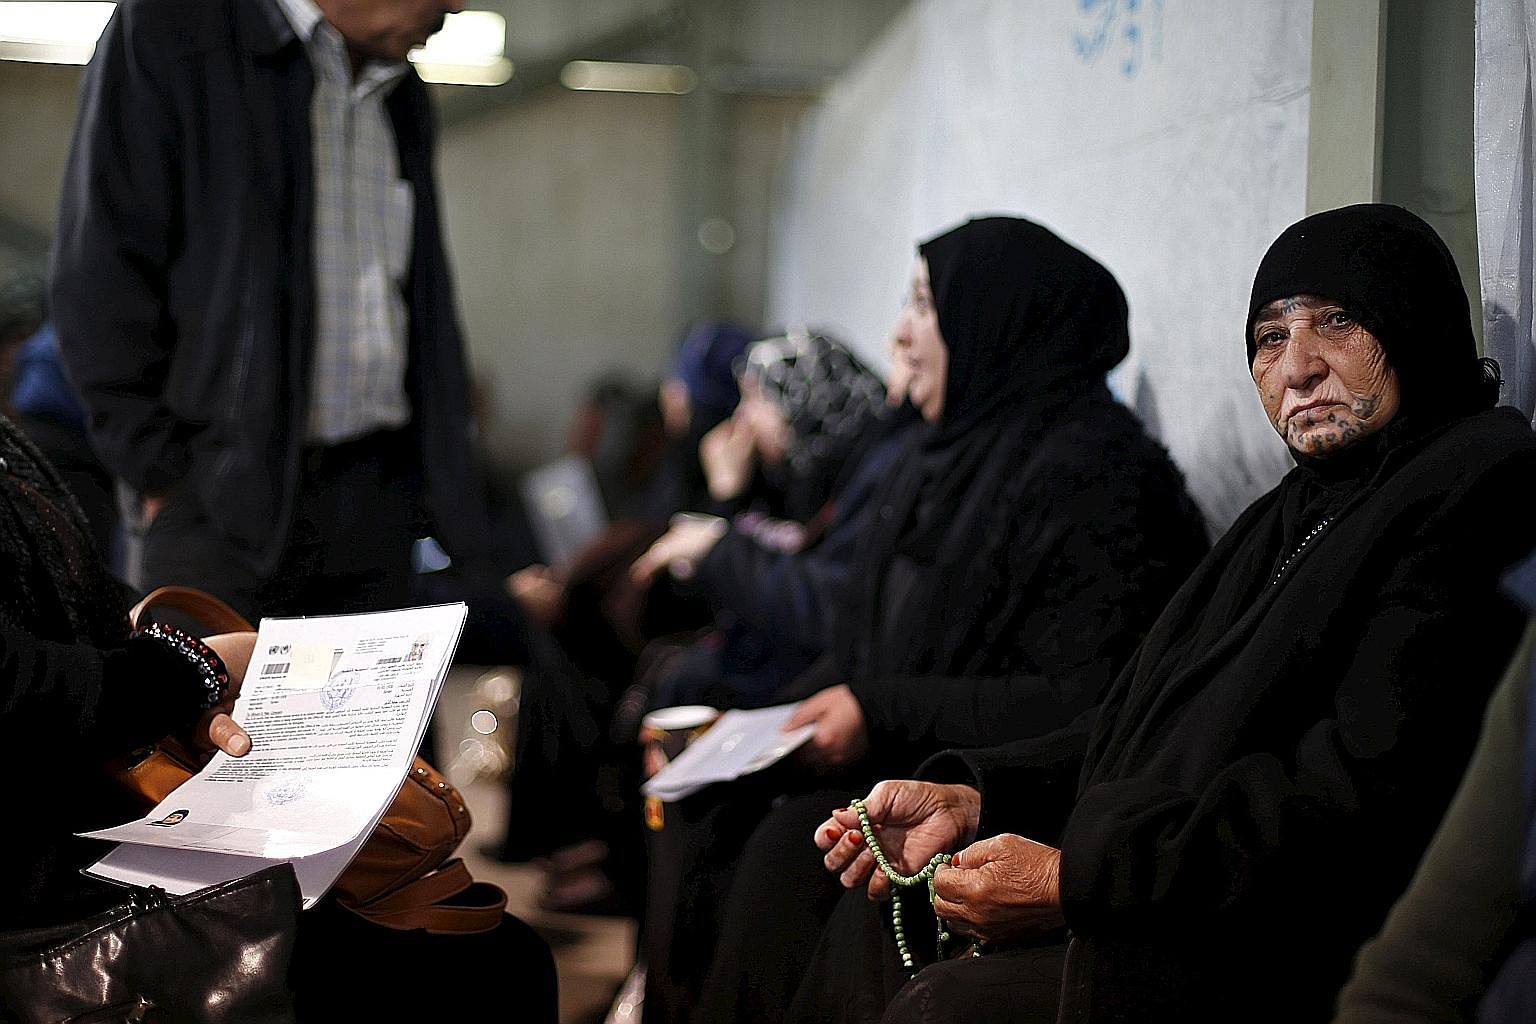 Syrian refugees waiting to register at the office of the UN High Commissioner for Refugees in Amman, Jordan, last week.